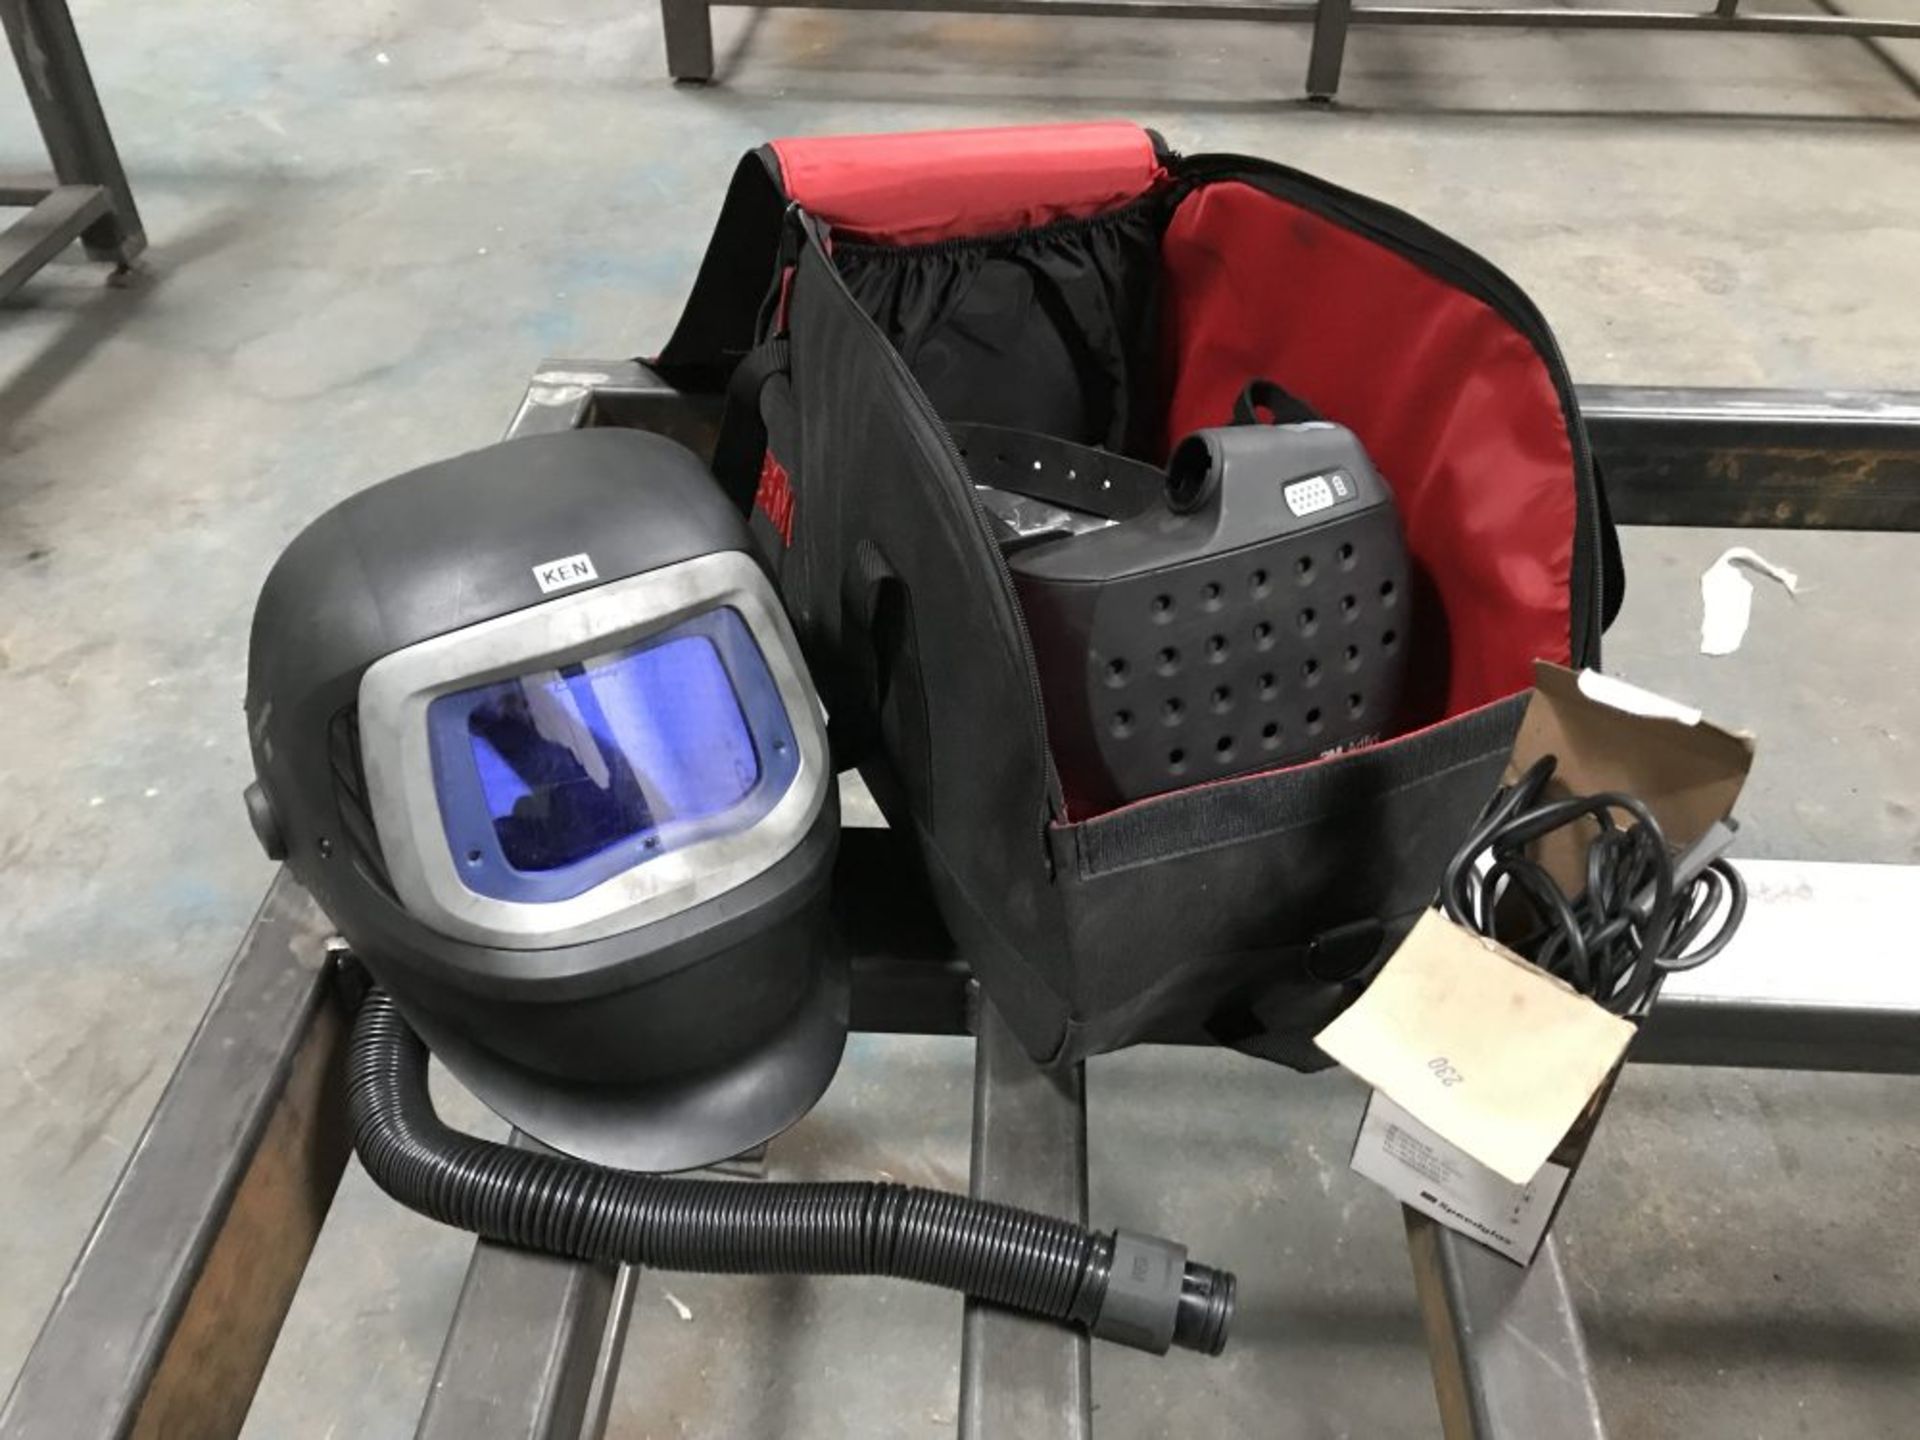 2 3M Speedglas 9100 air respirator welding helmets with Adflow battery packs, chargers and bags